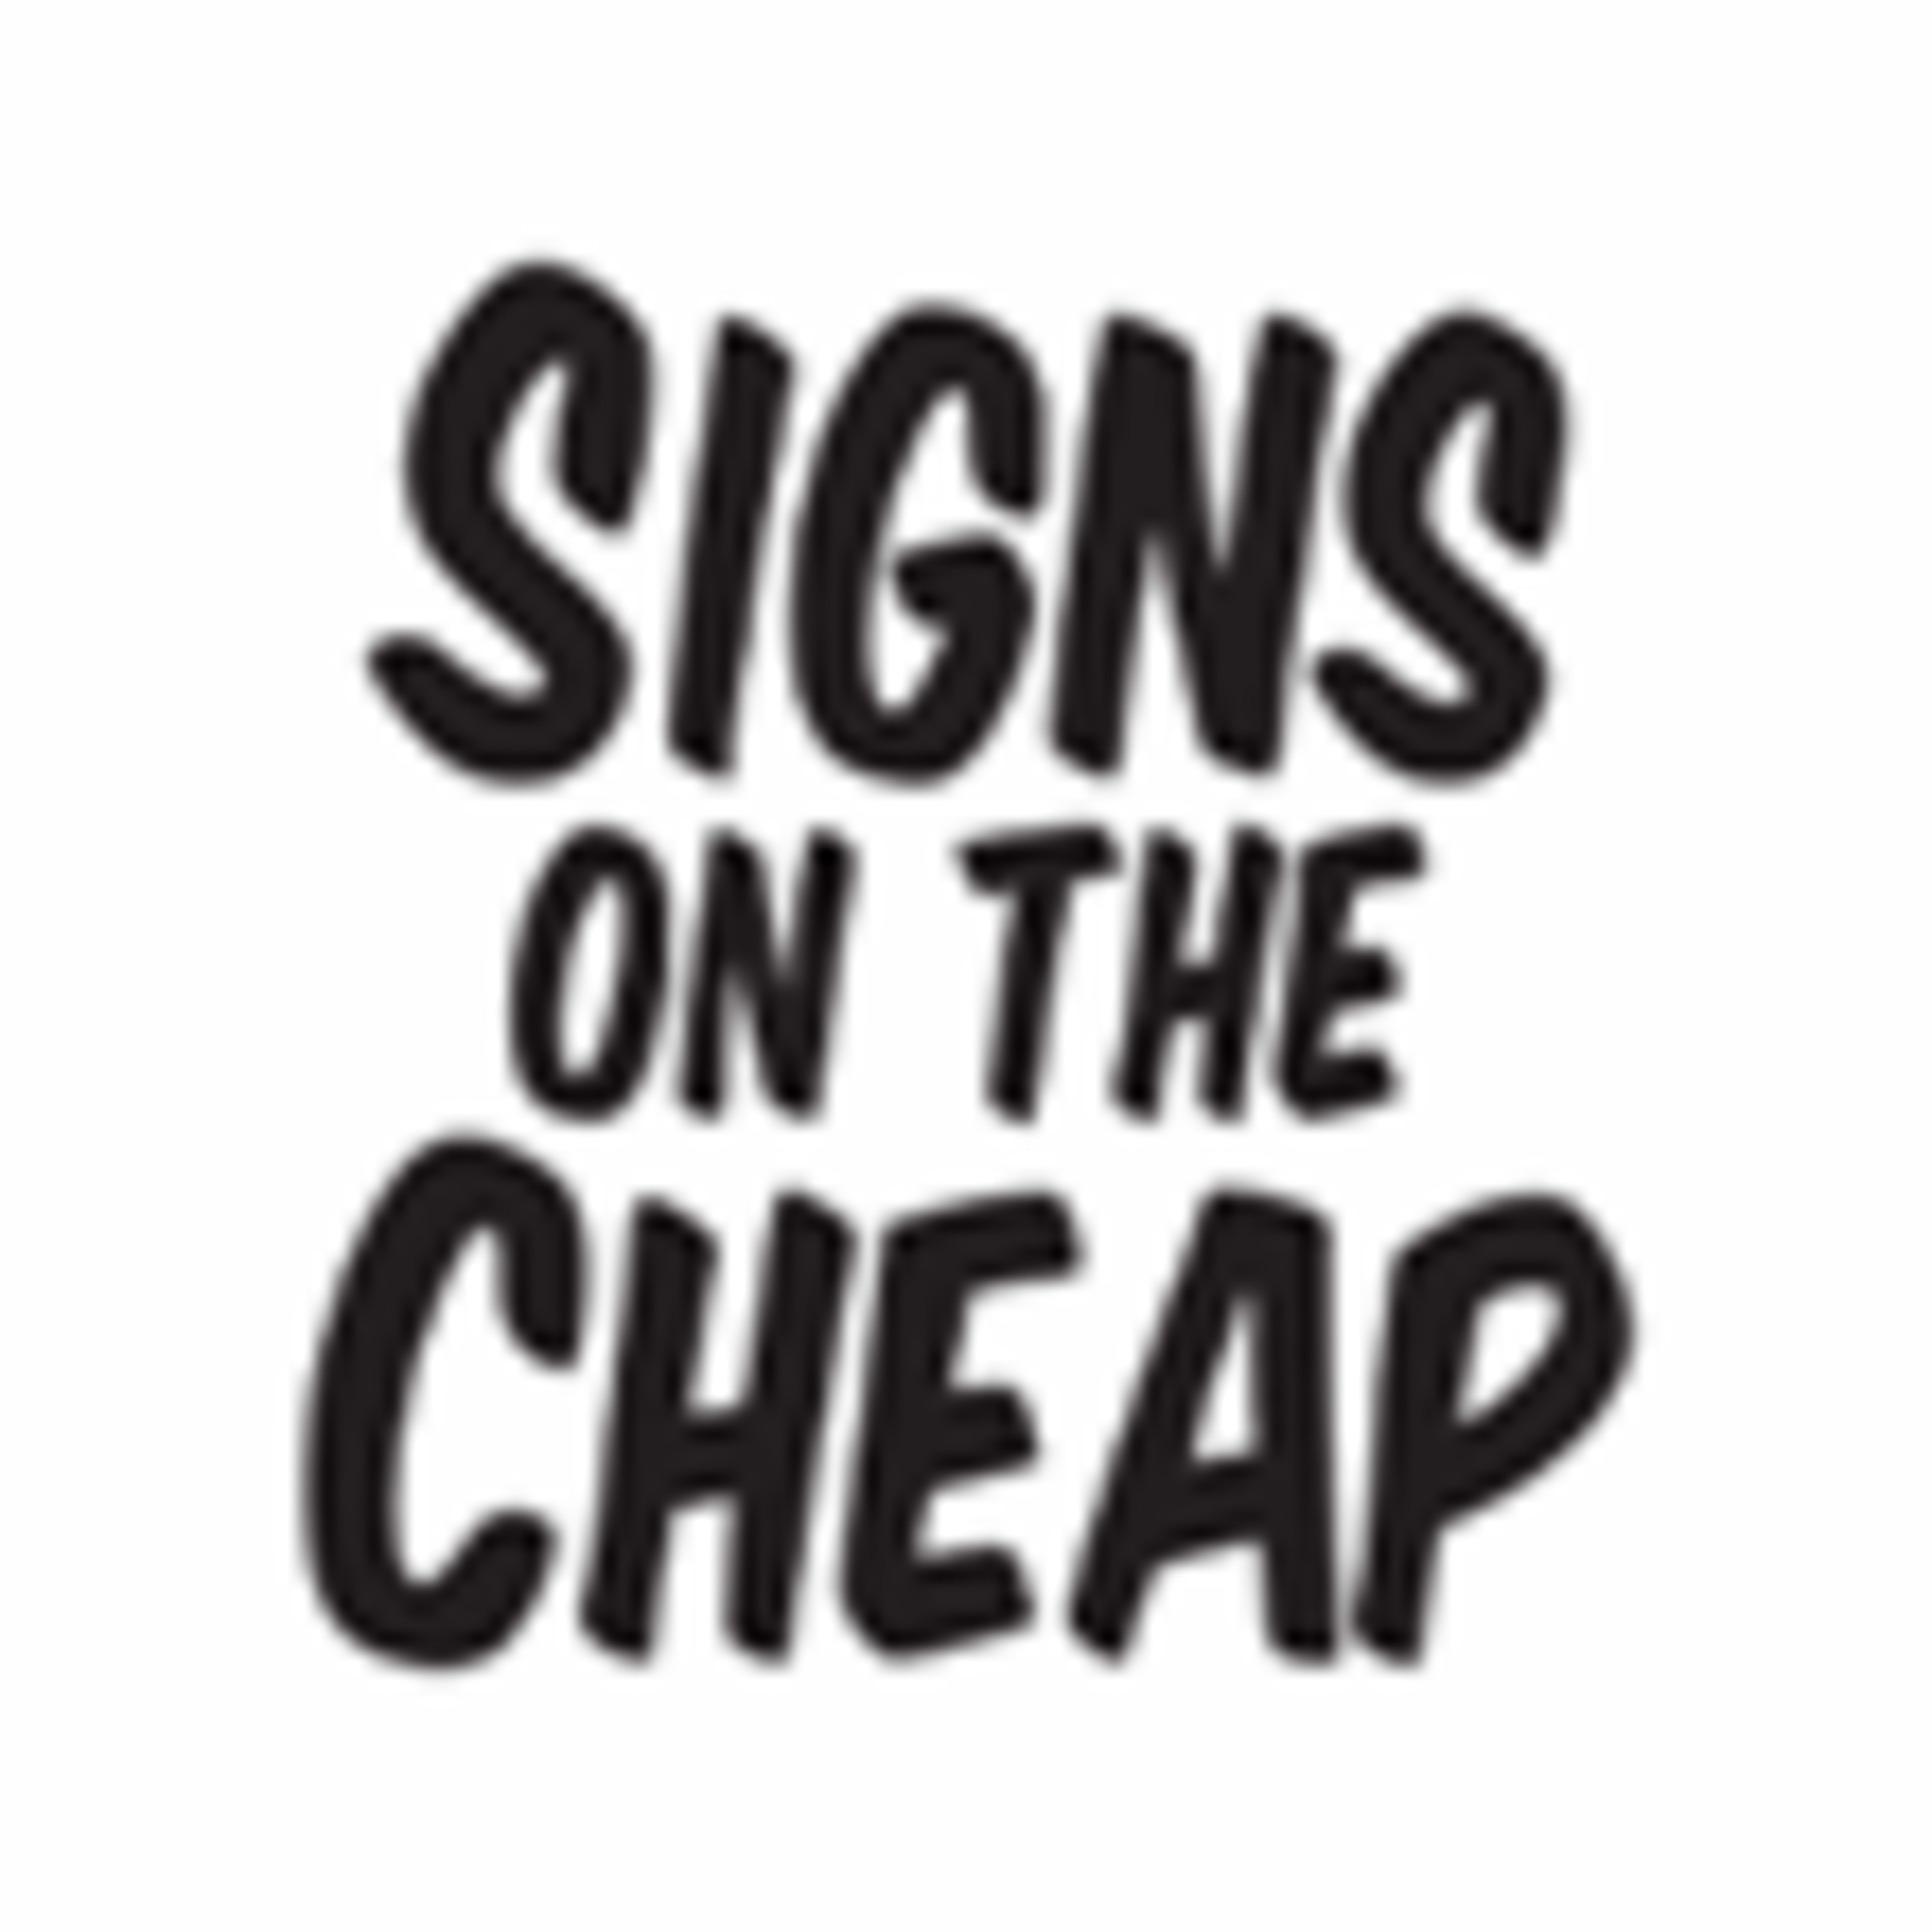 Signs On The CheapCode